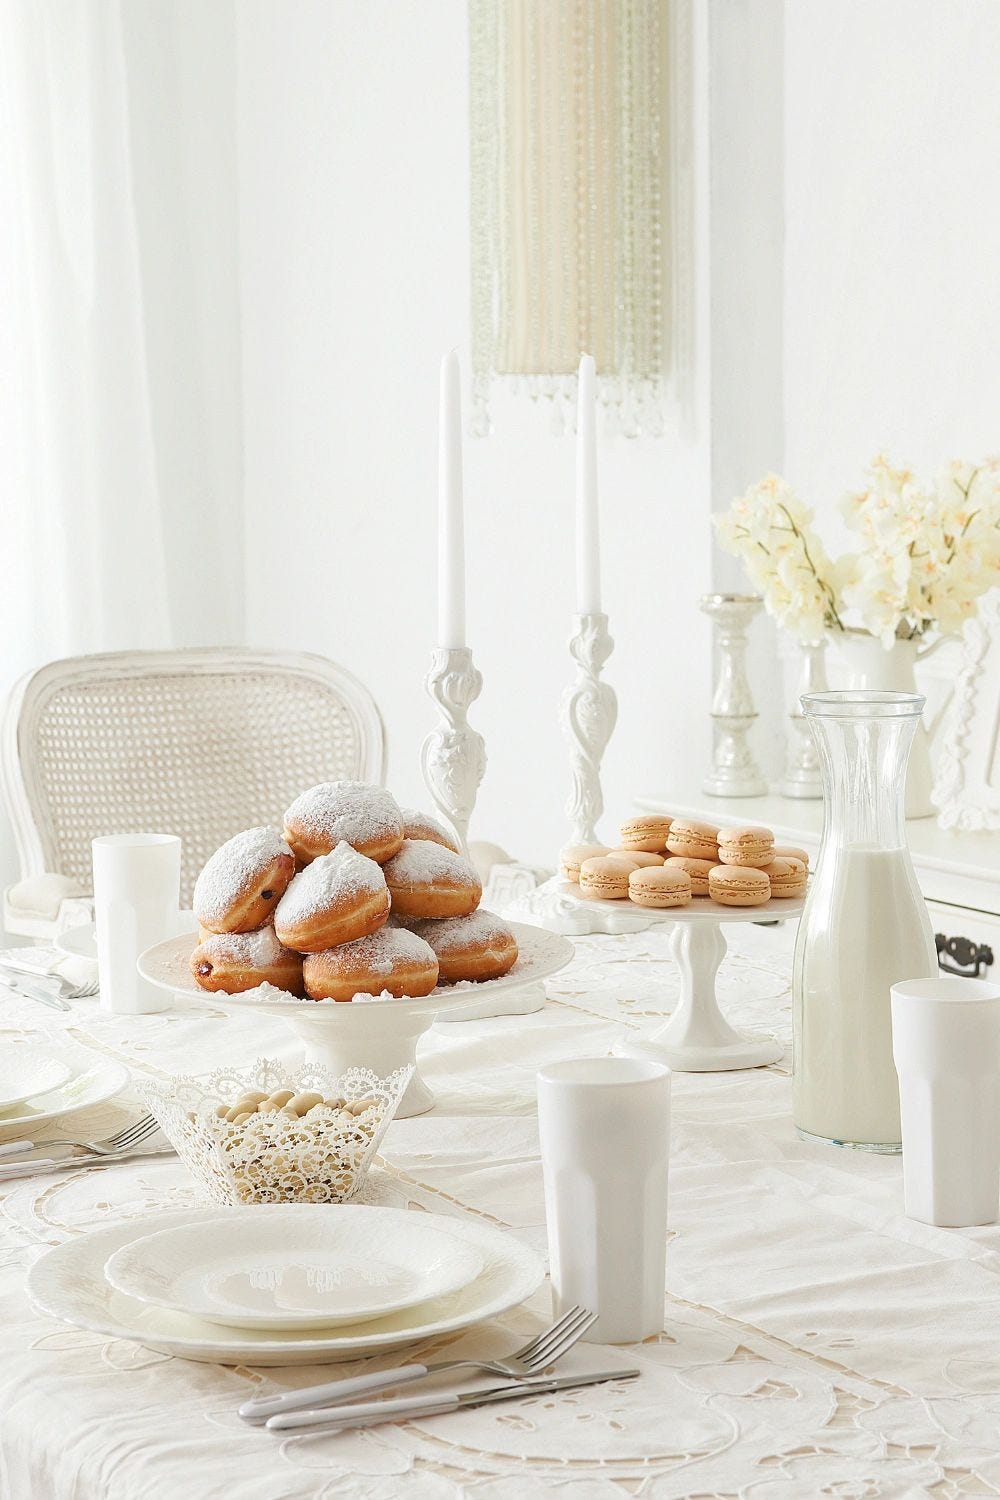 Guess which design style this table setting is? Click here to find out and to discover your favorite home decor style.